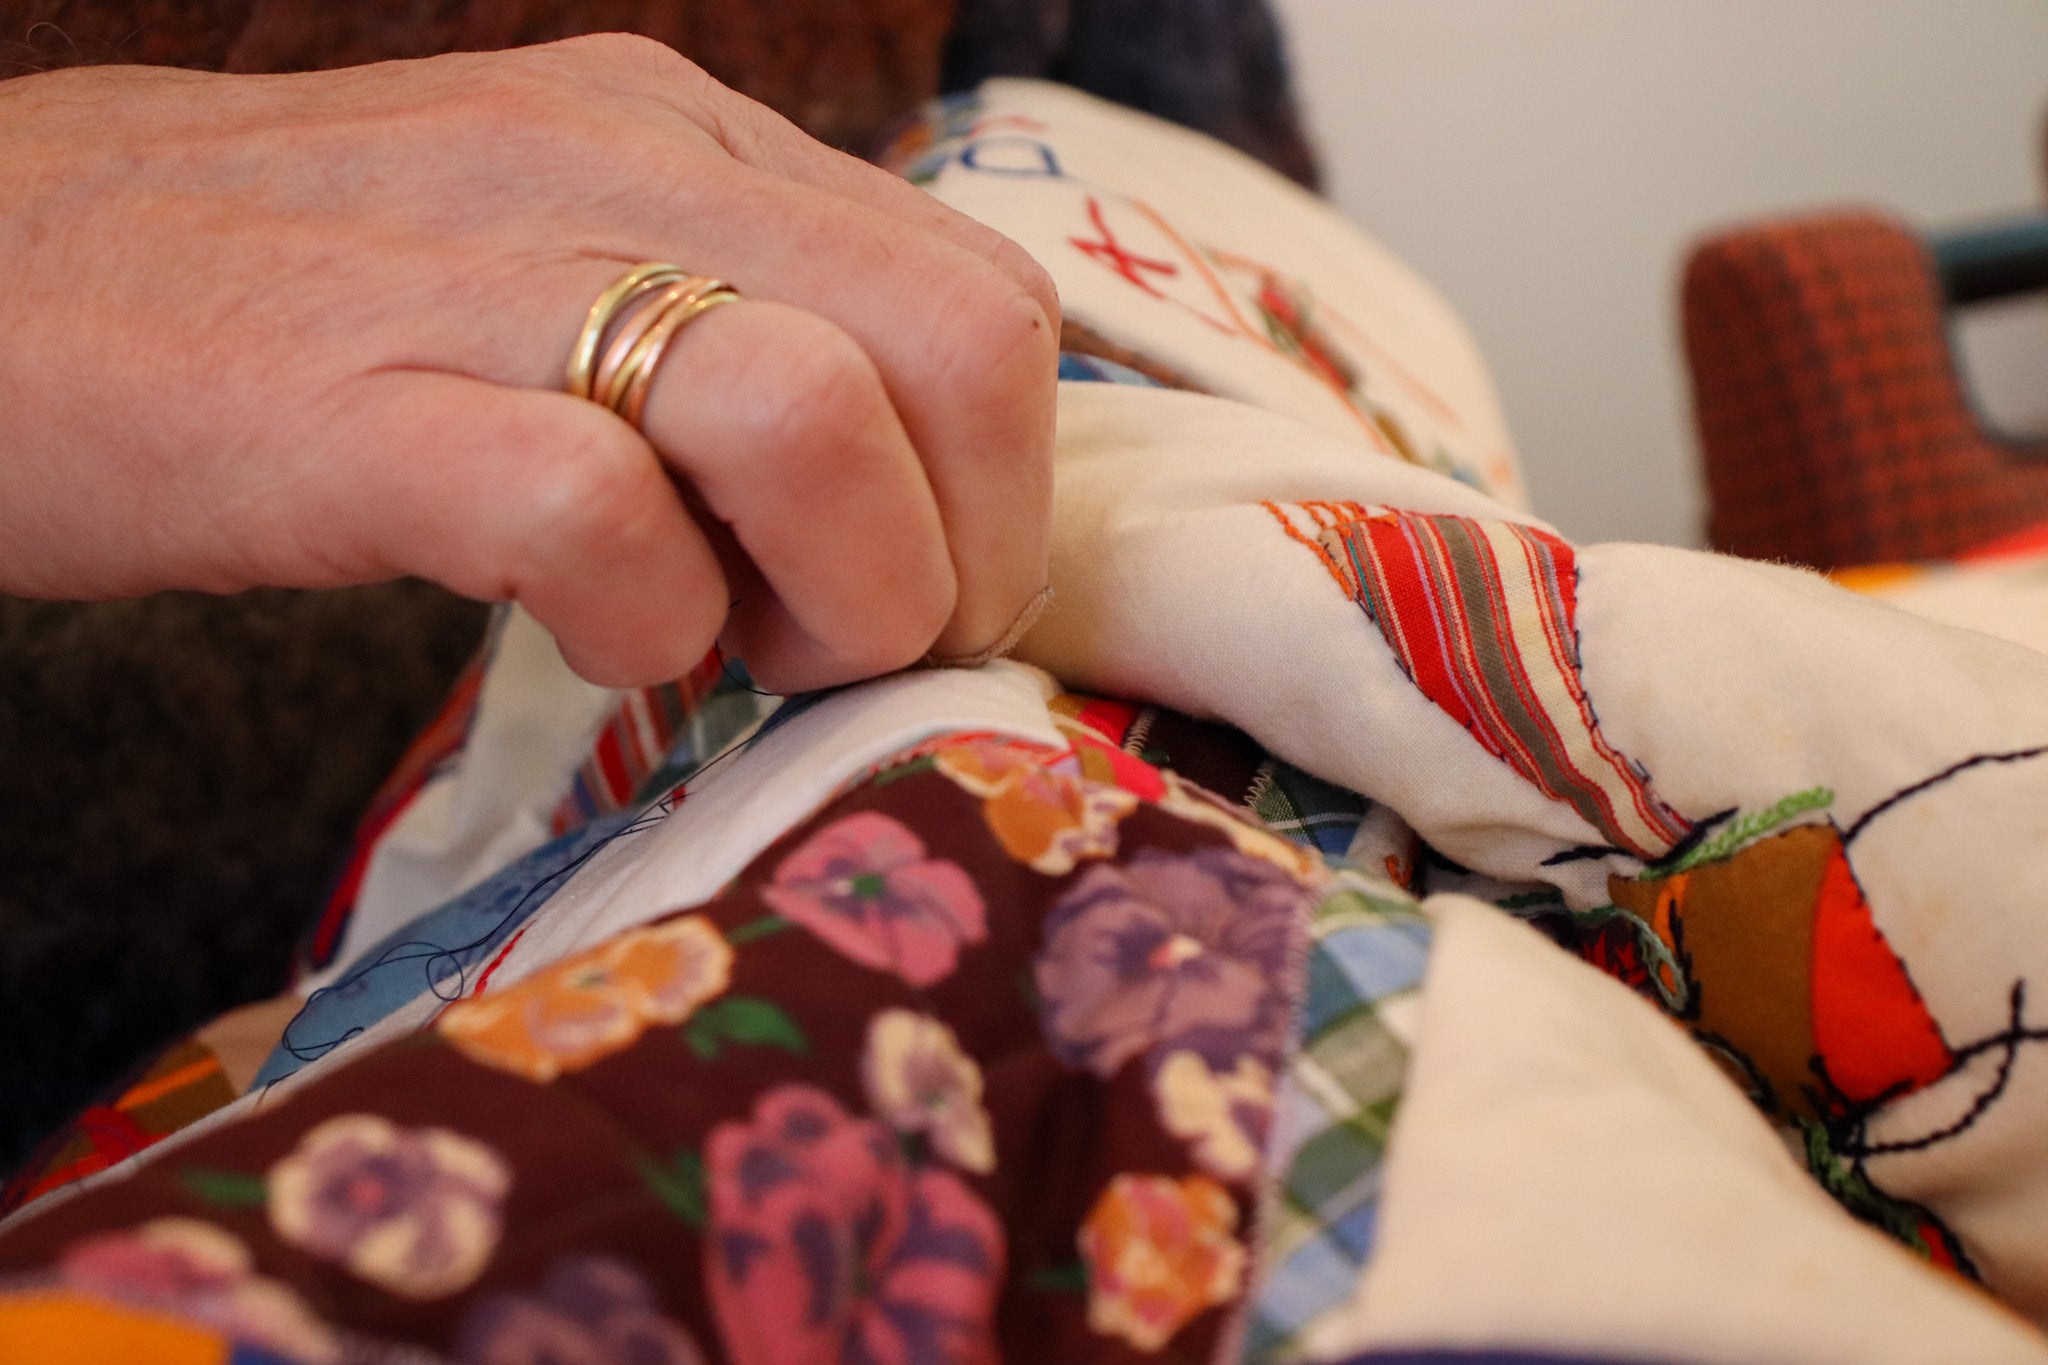 Lewis's story - Stitching can transform lives